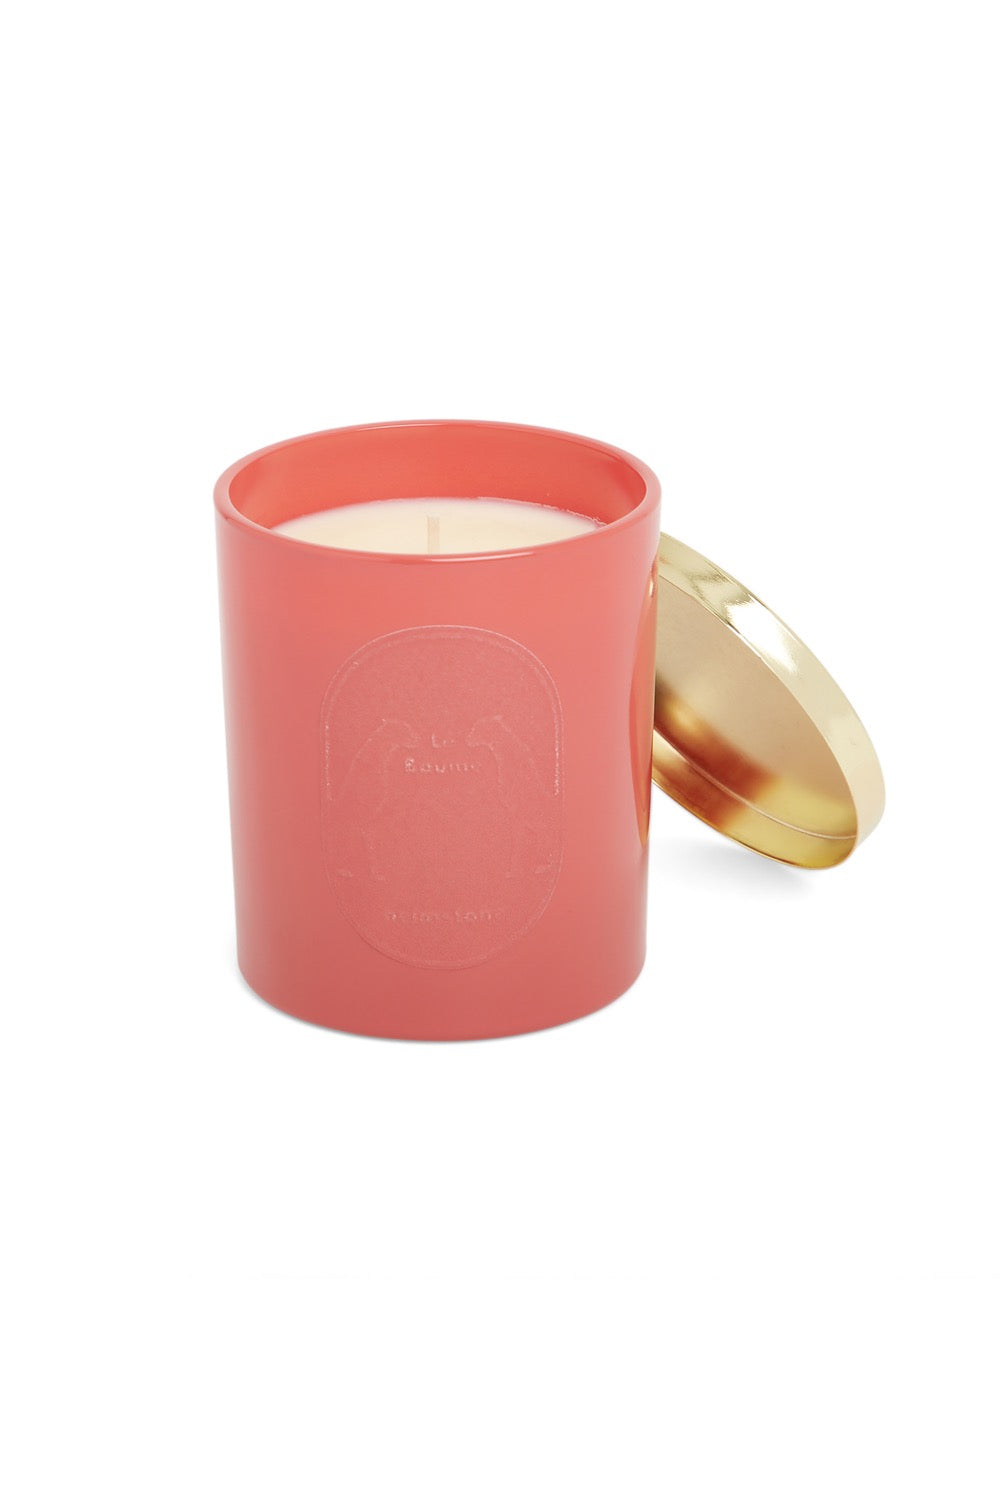 Le Baume - Candle kit pink Leopard